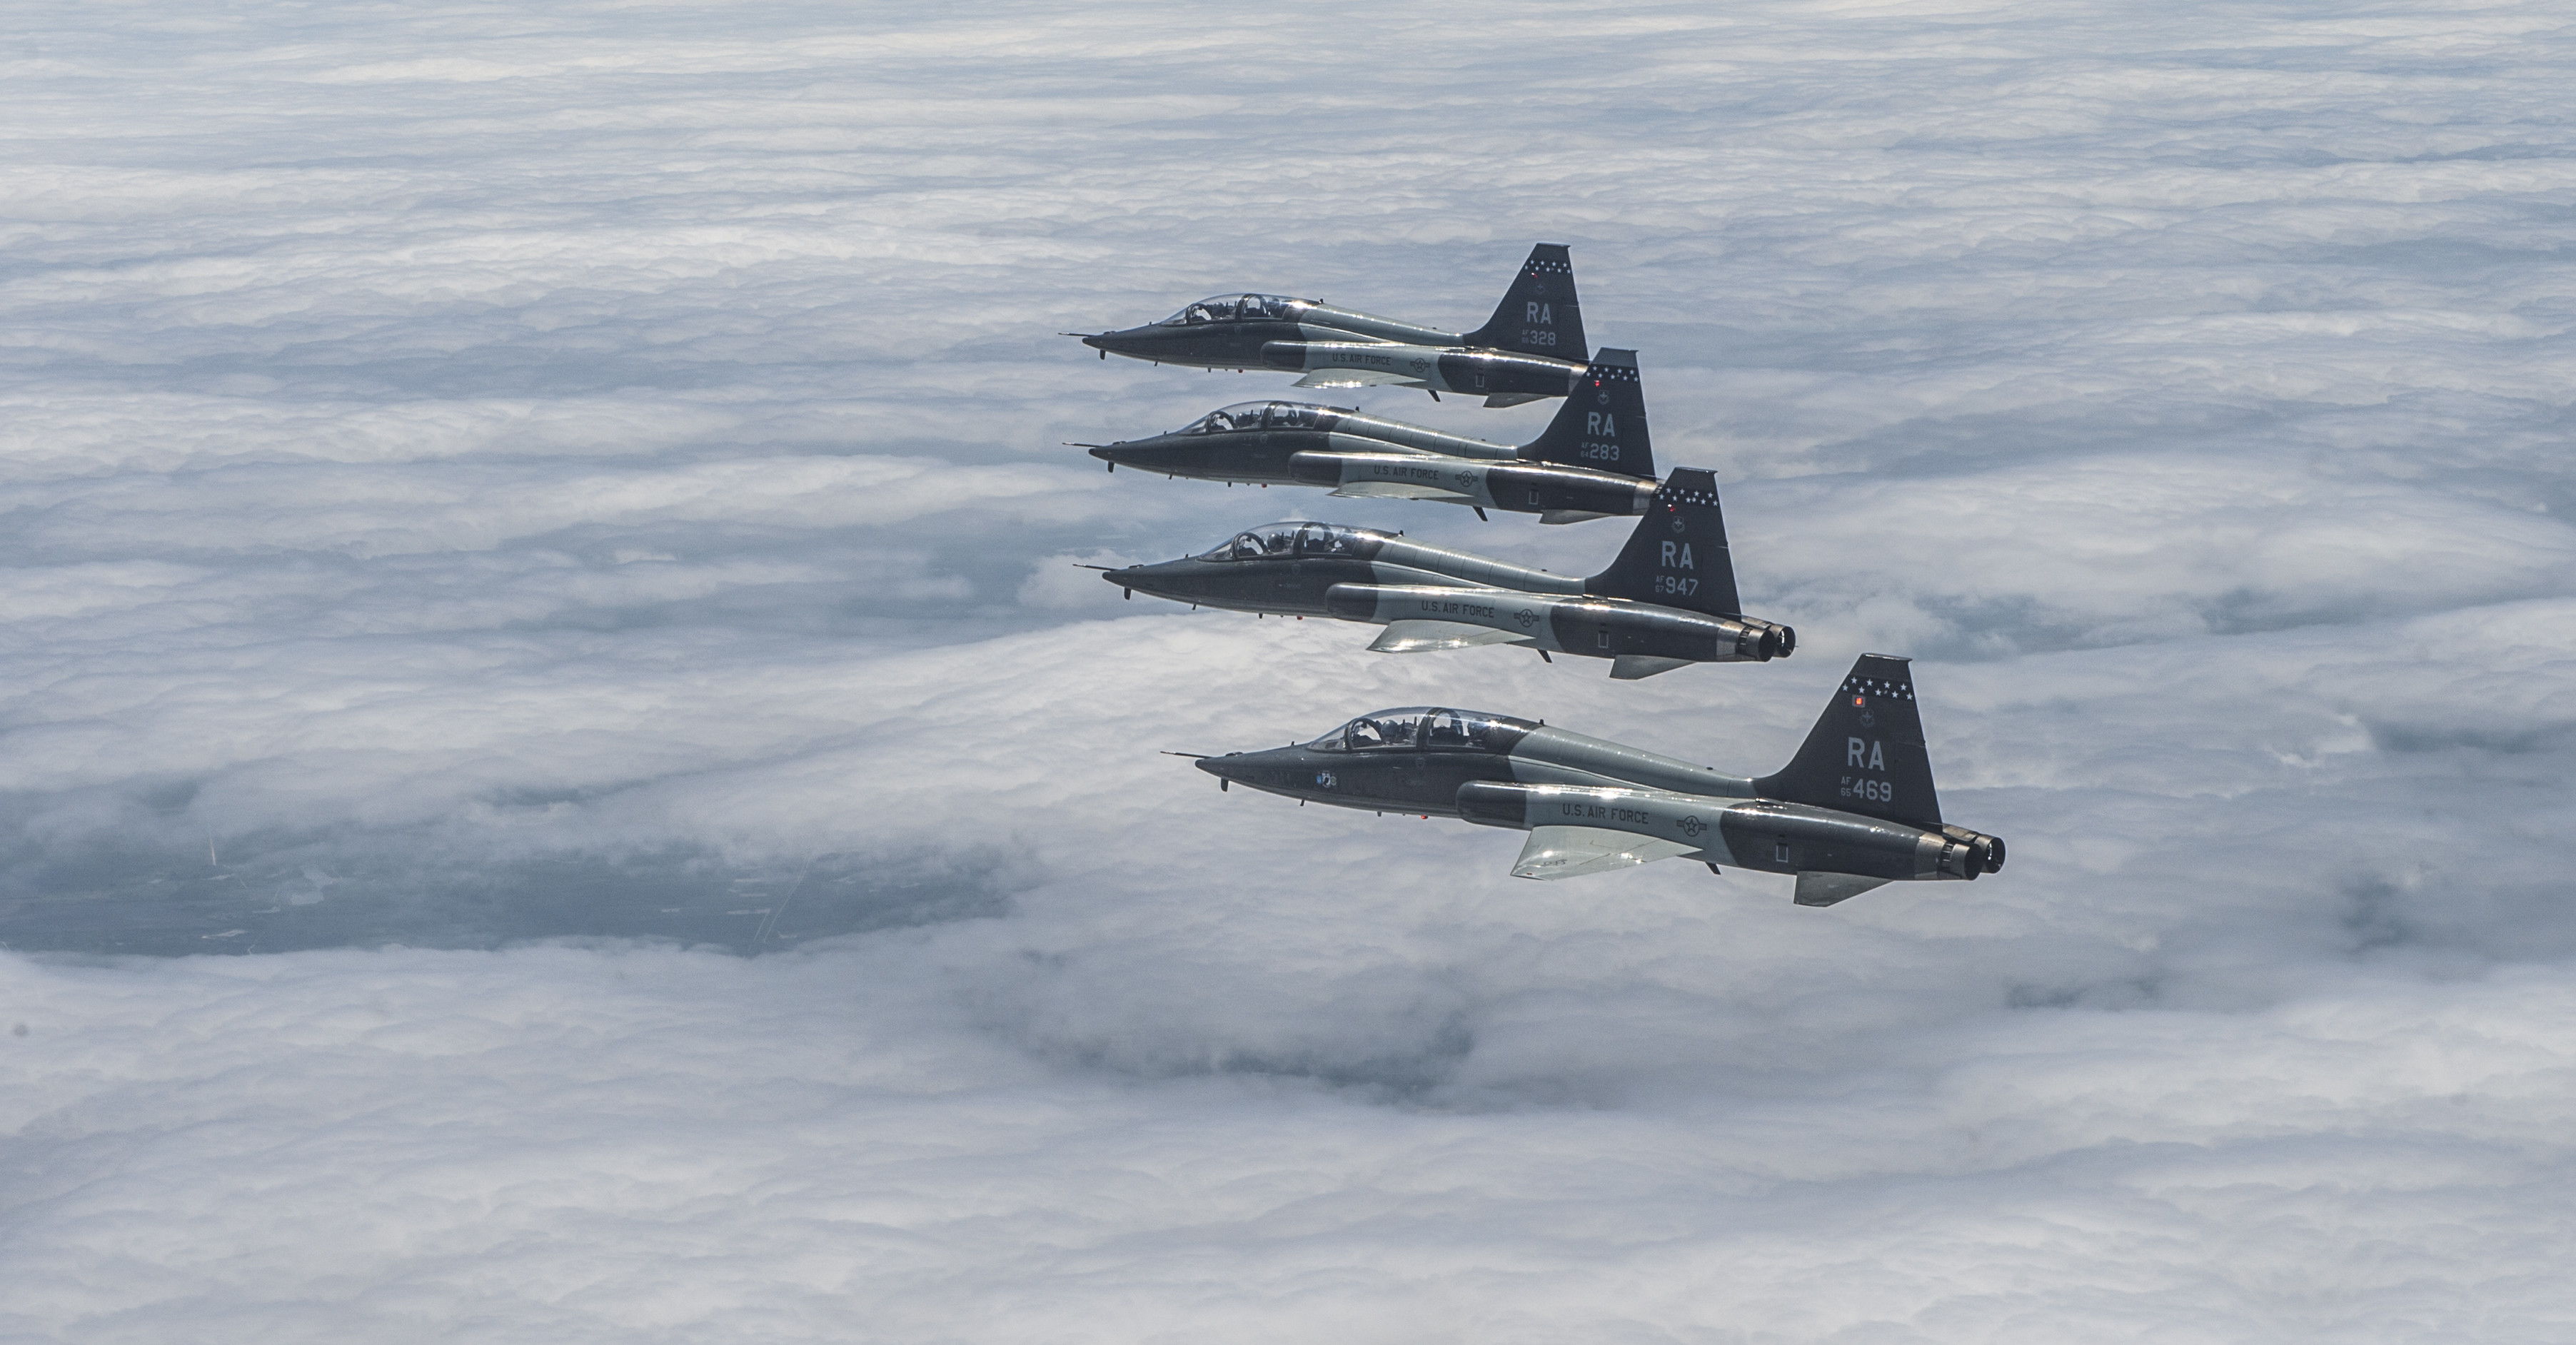 T-38 completes 50 years of service > Air Force > Article Display